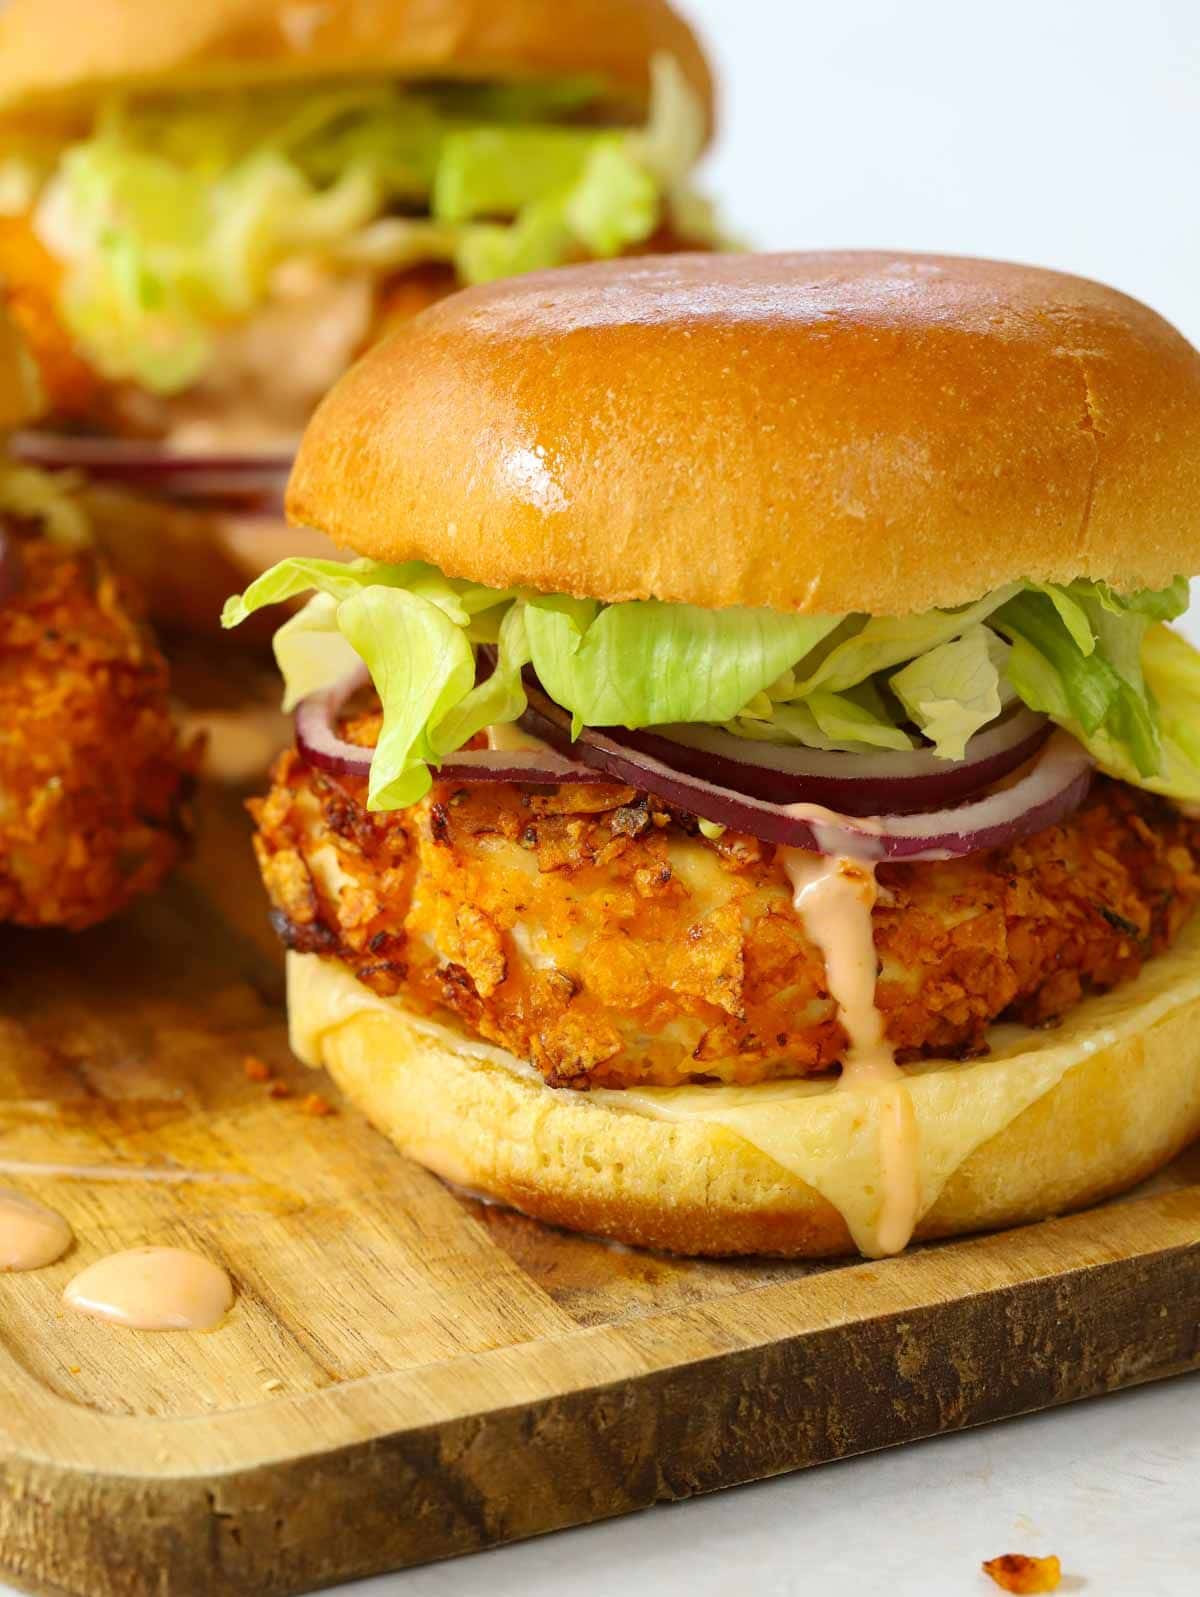 A Crispy Chicken Burger with salad and hot honey sauce on a serving board, ready to eat.